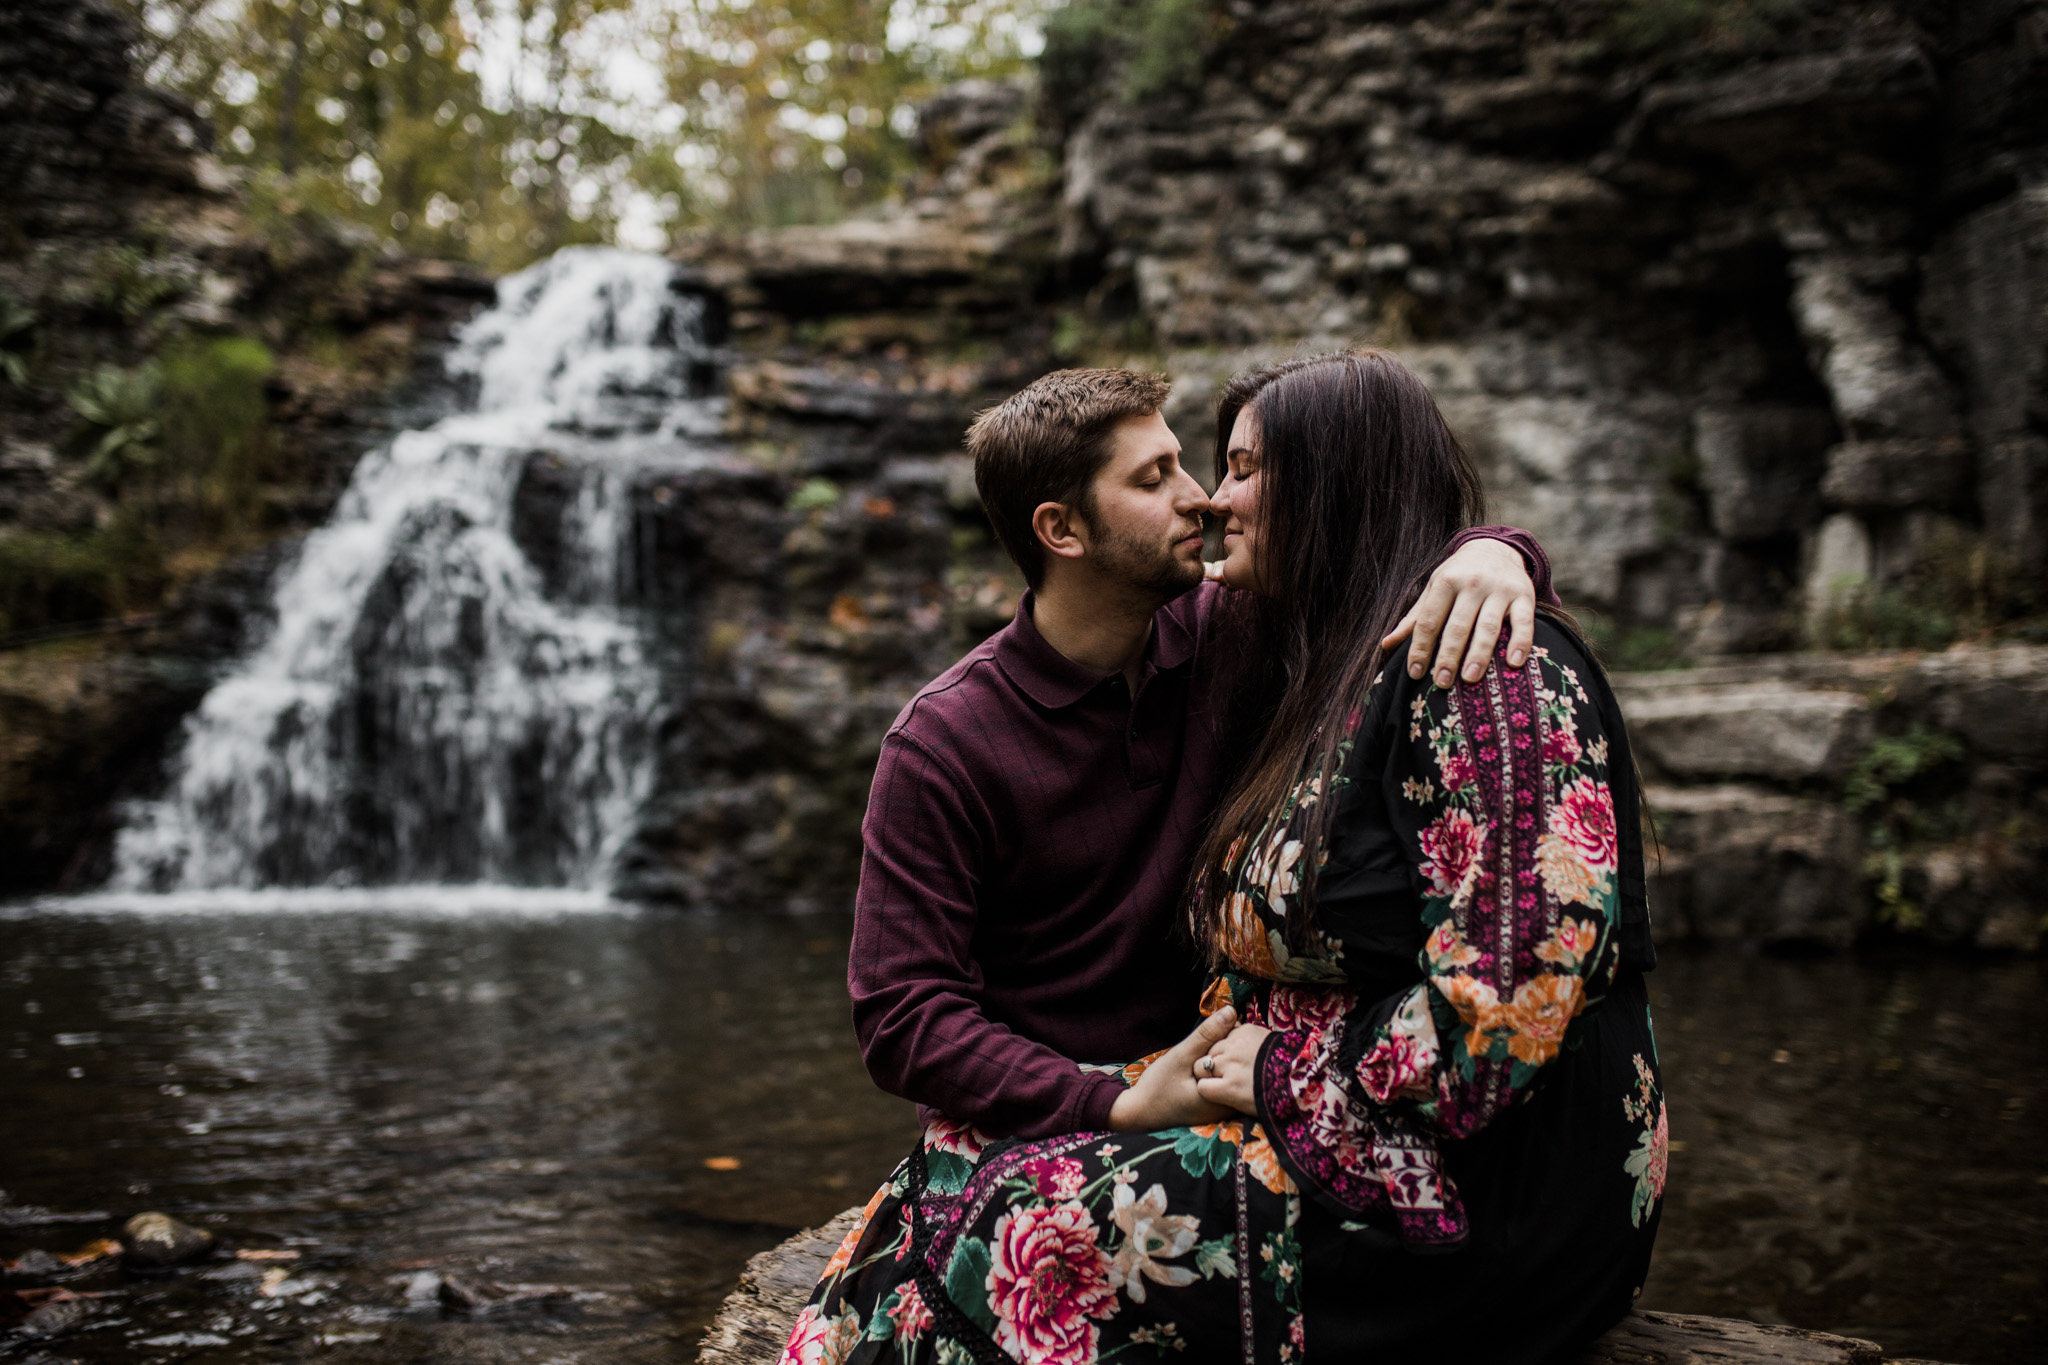 A moody couple's session at France Park, Indiana. Tucked unto the cove by the rushing waterfall on a summer evening.